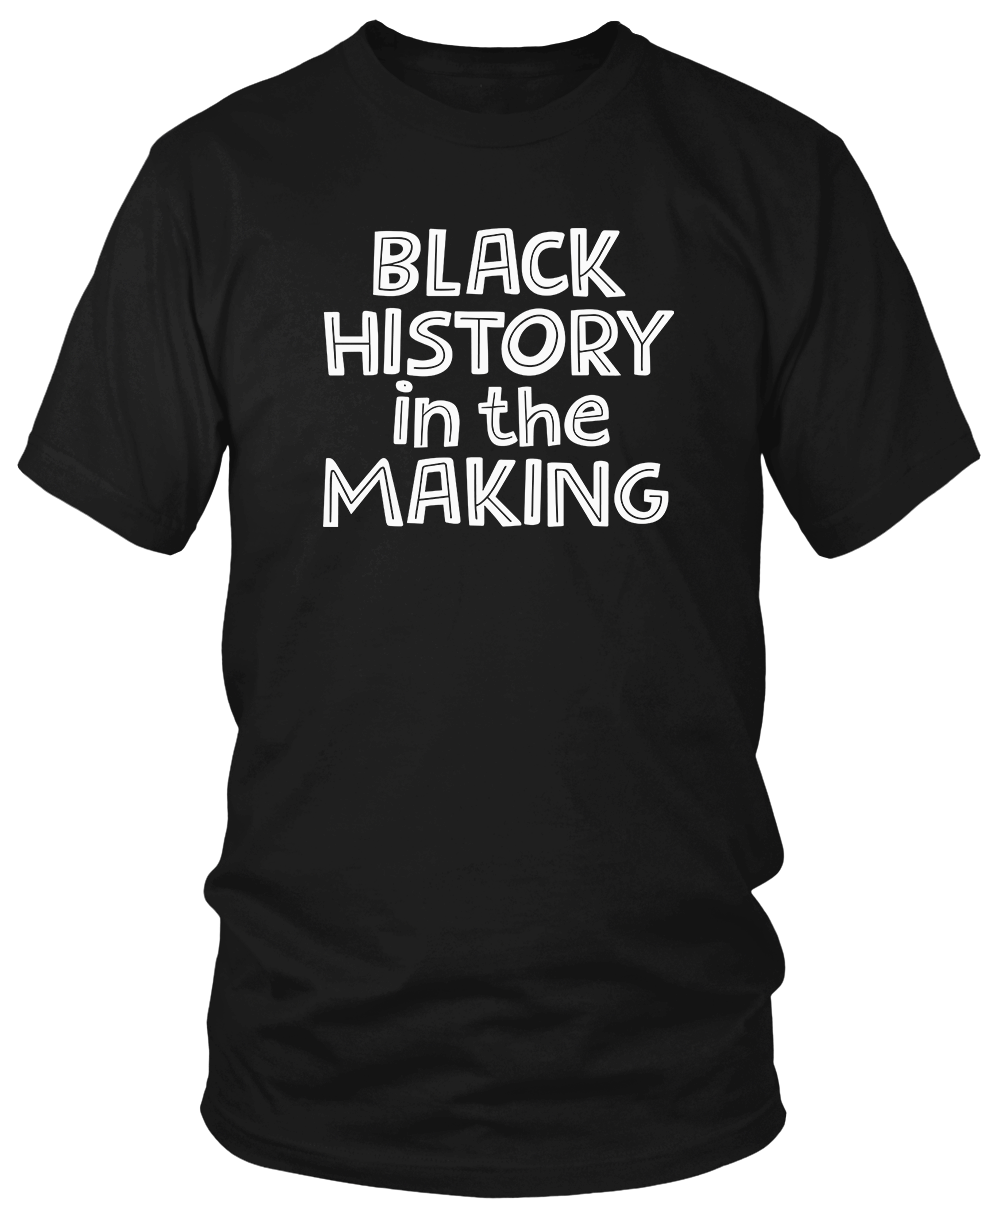 BLACK HISTORY IN THE MAKING T-shirts